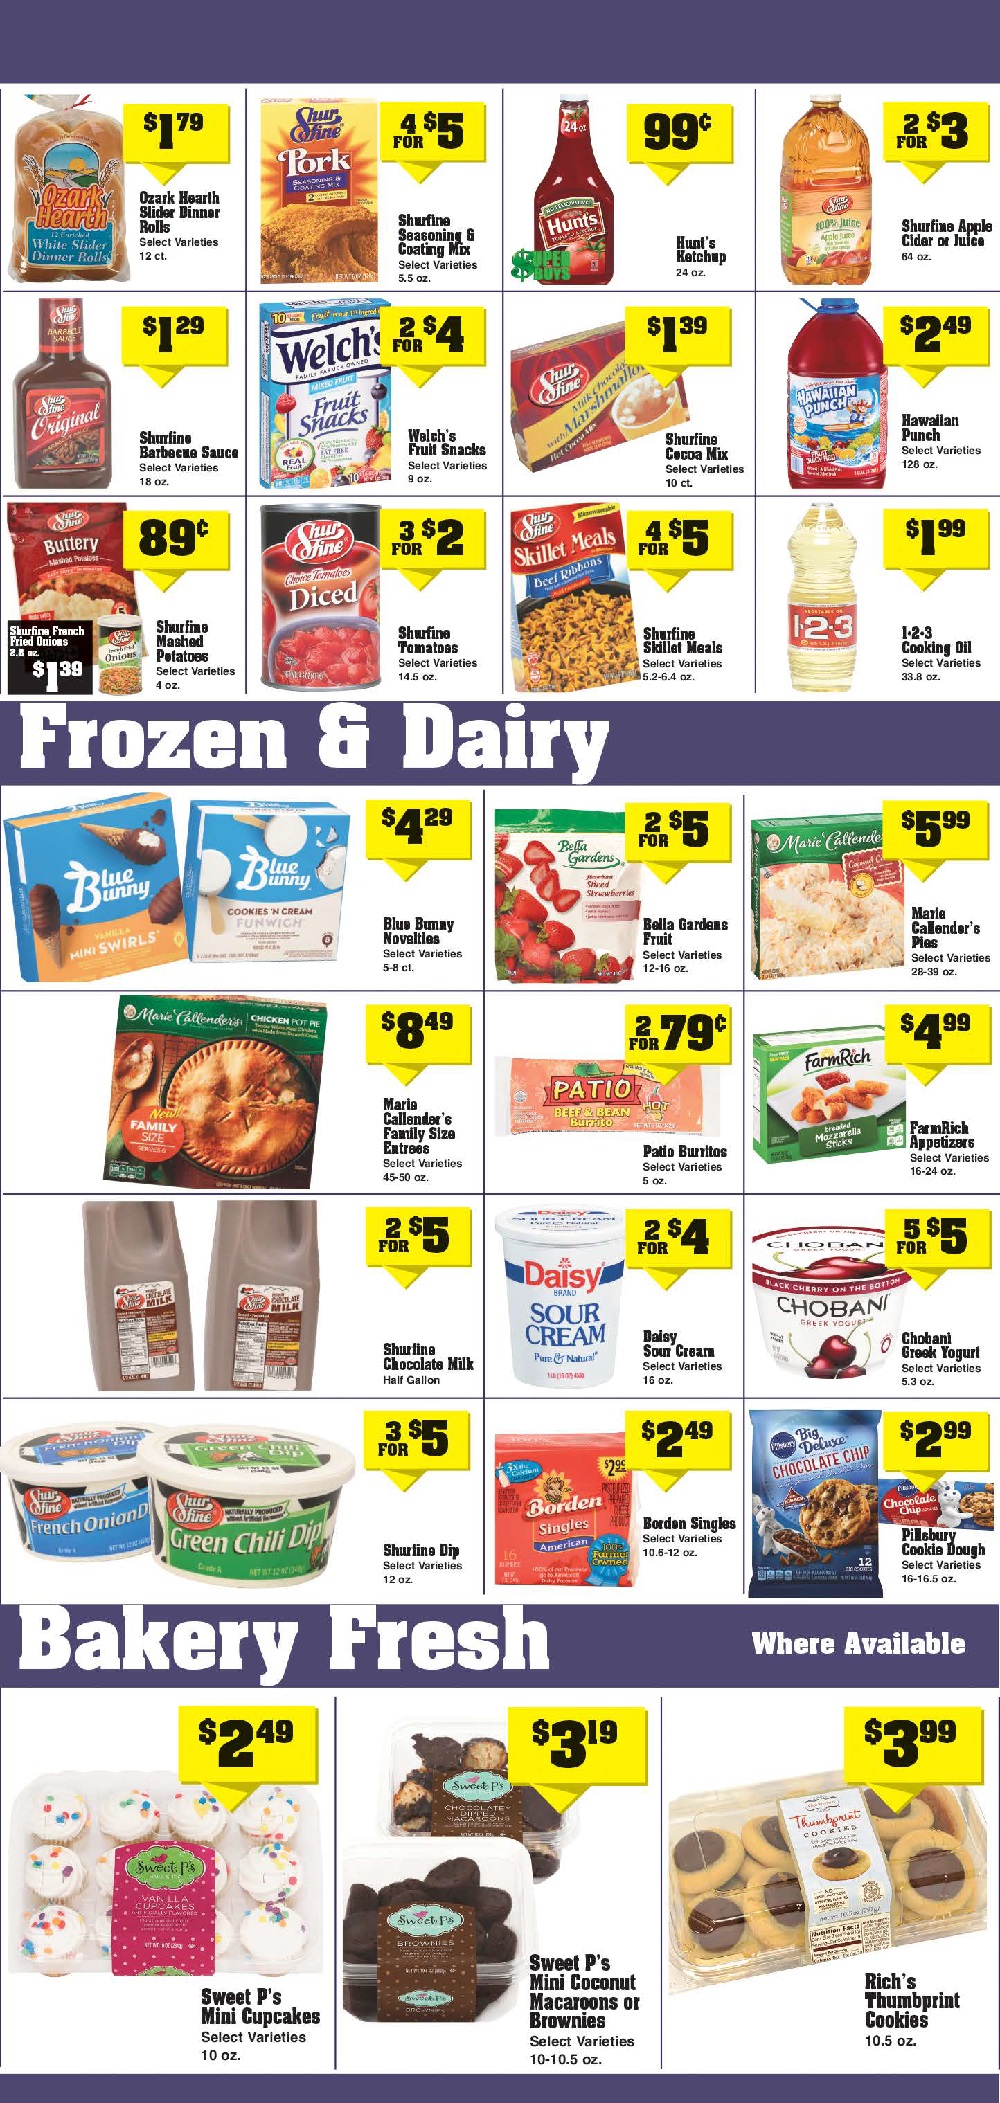 weekly-sales-for-oct-26th-nov-1st-pg3